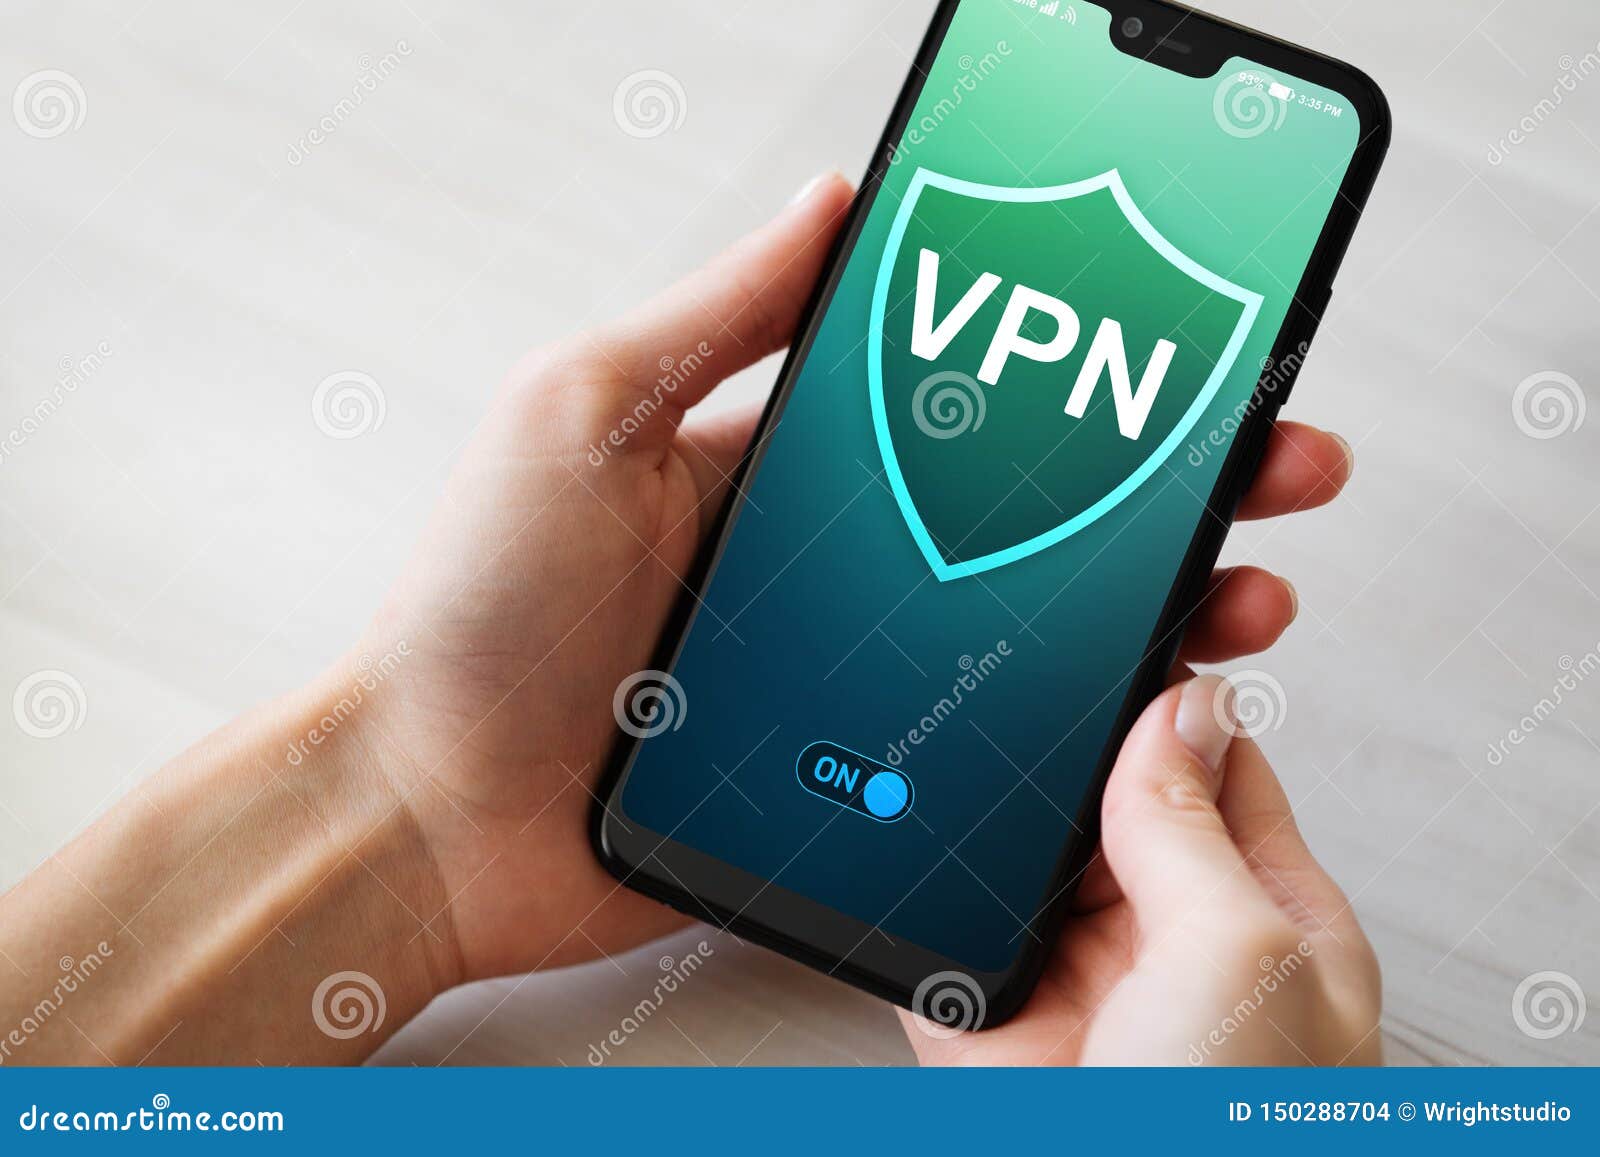 vpn virtual private network, anonymous and secure internet access. technology concept.